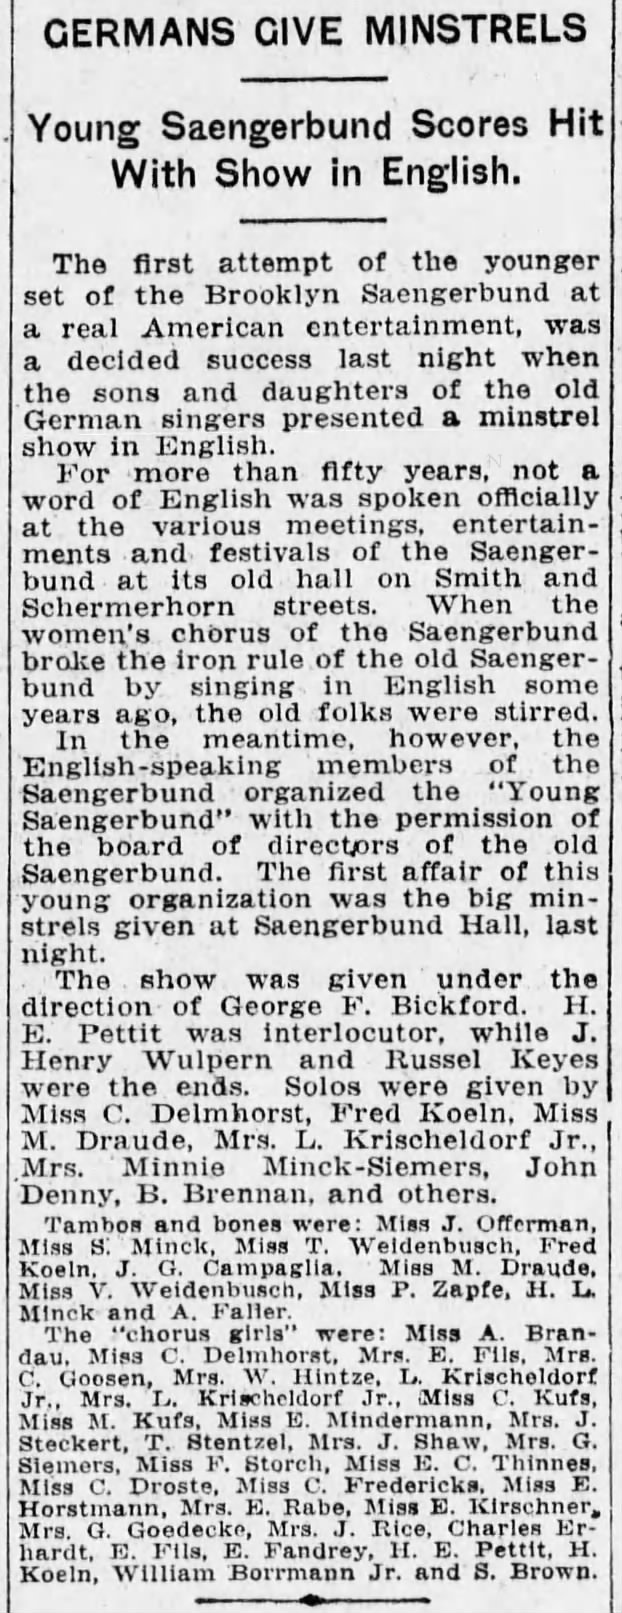 Uncle Fred and H. Koeln (grandpa) mentioned in this article about Saengerbund